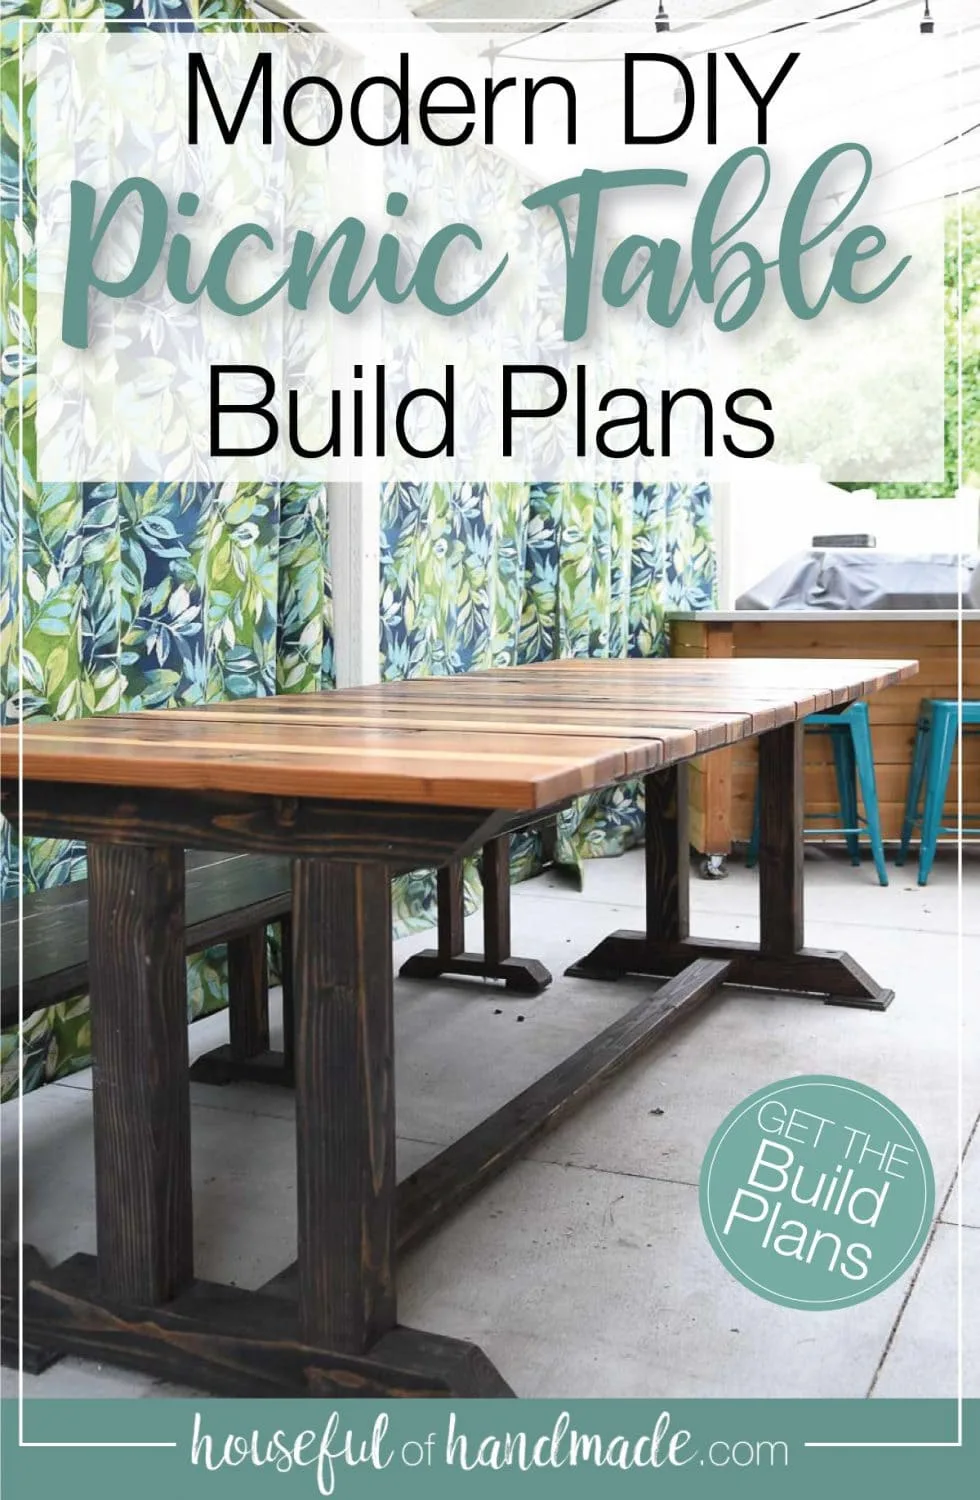 Completed DIY picnic table with redwood top and text overlay: Modern DIY Picnic Table Build Plans.